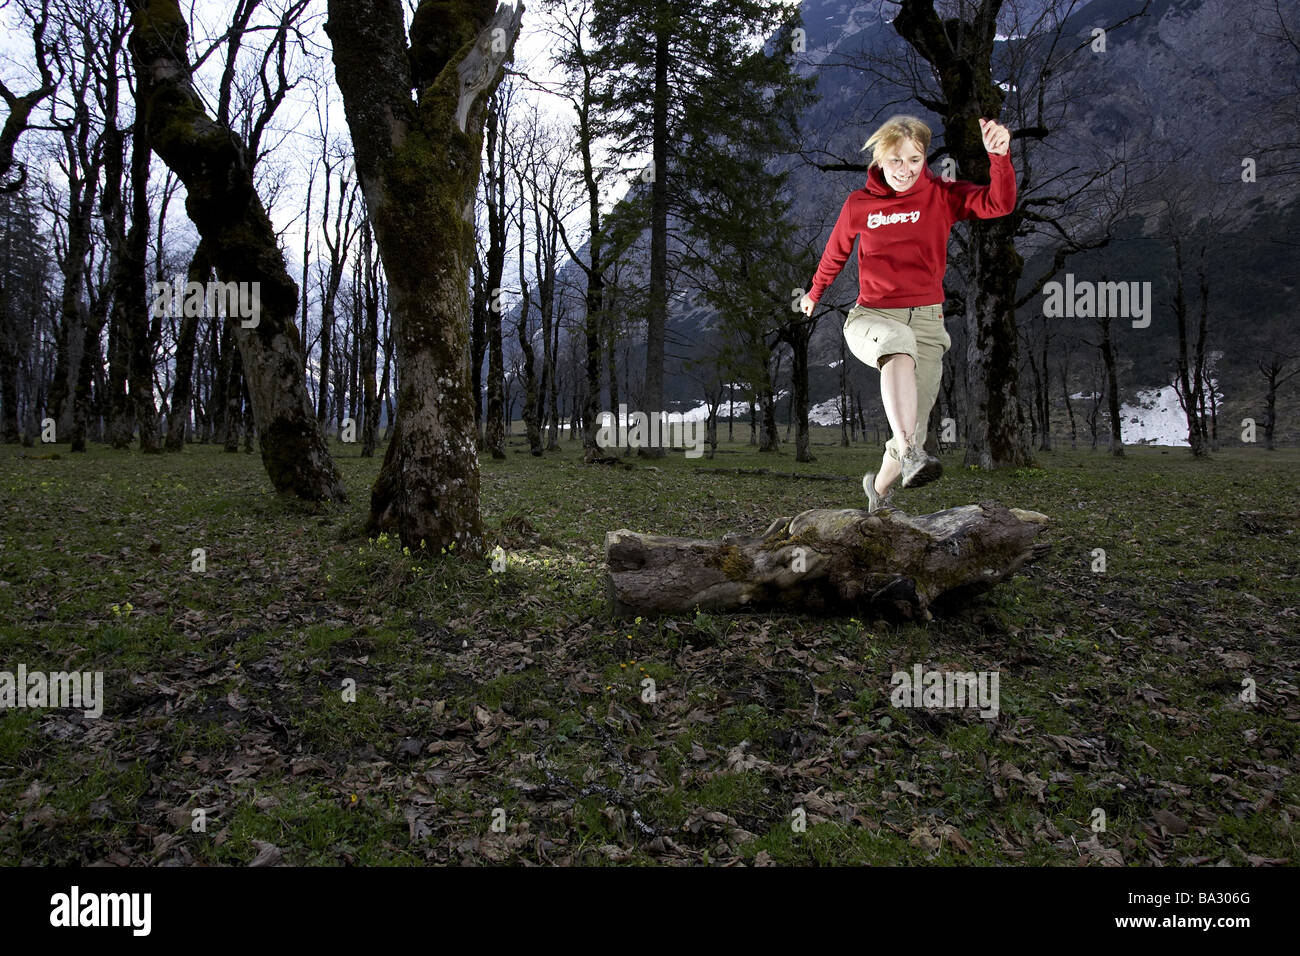 Woman young runs jump log forest series people 20-30 years quite-body blond leisurewear athletically movement runs activity Stock Photo